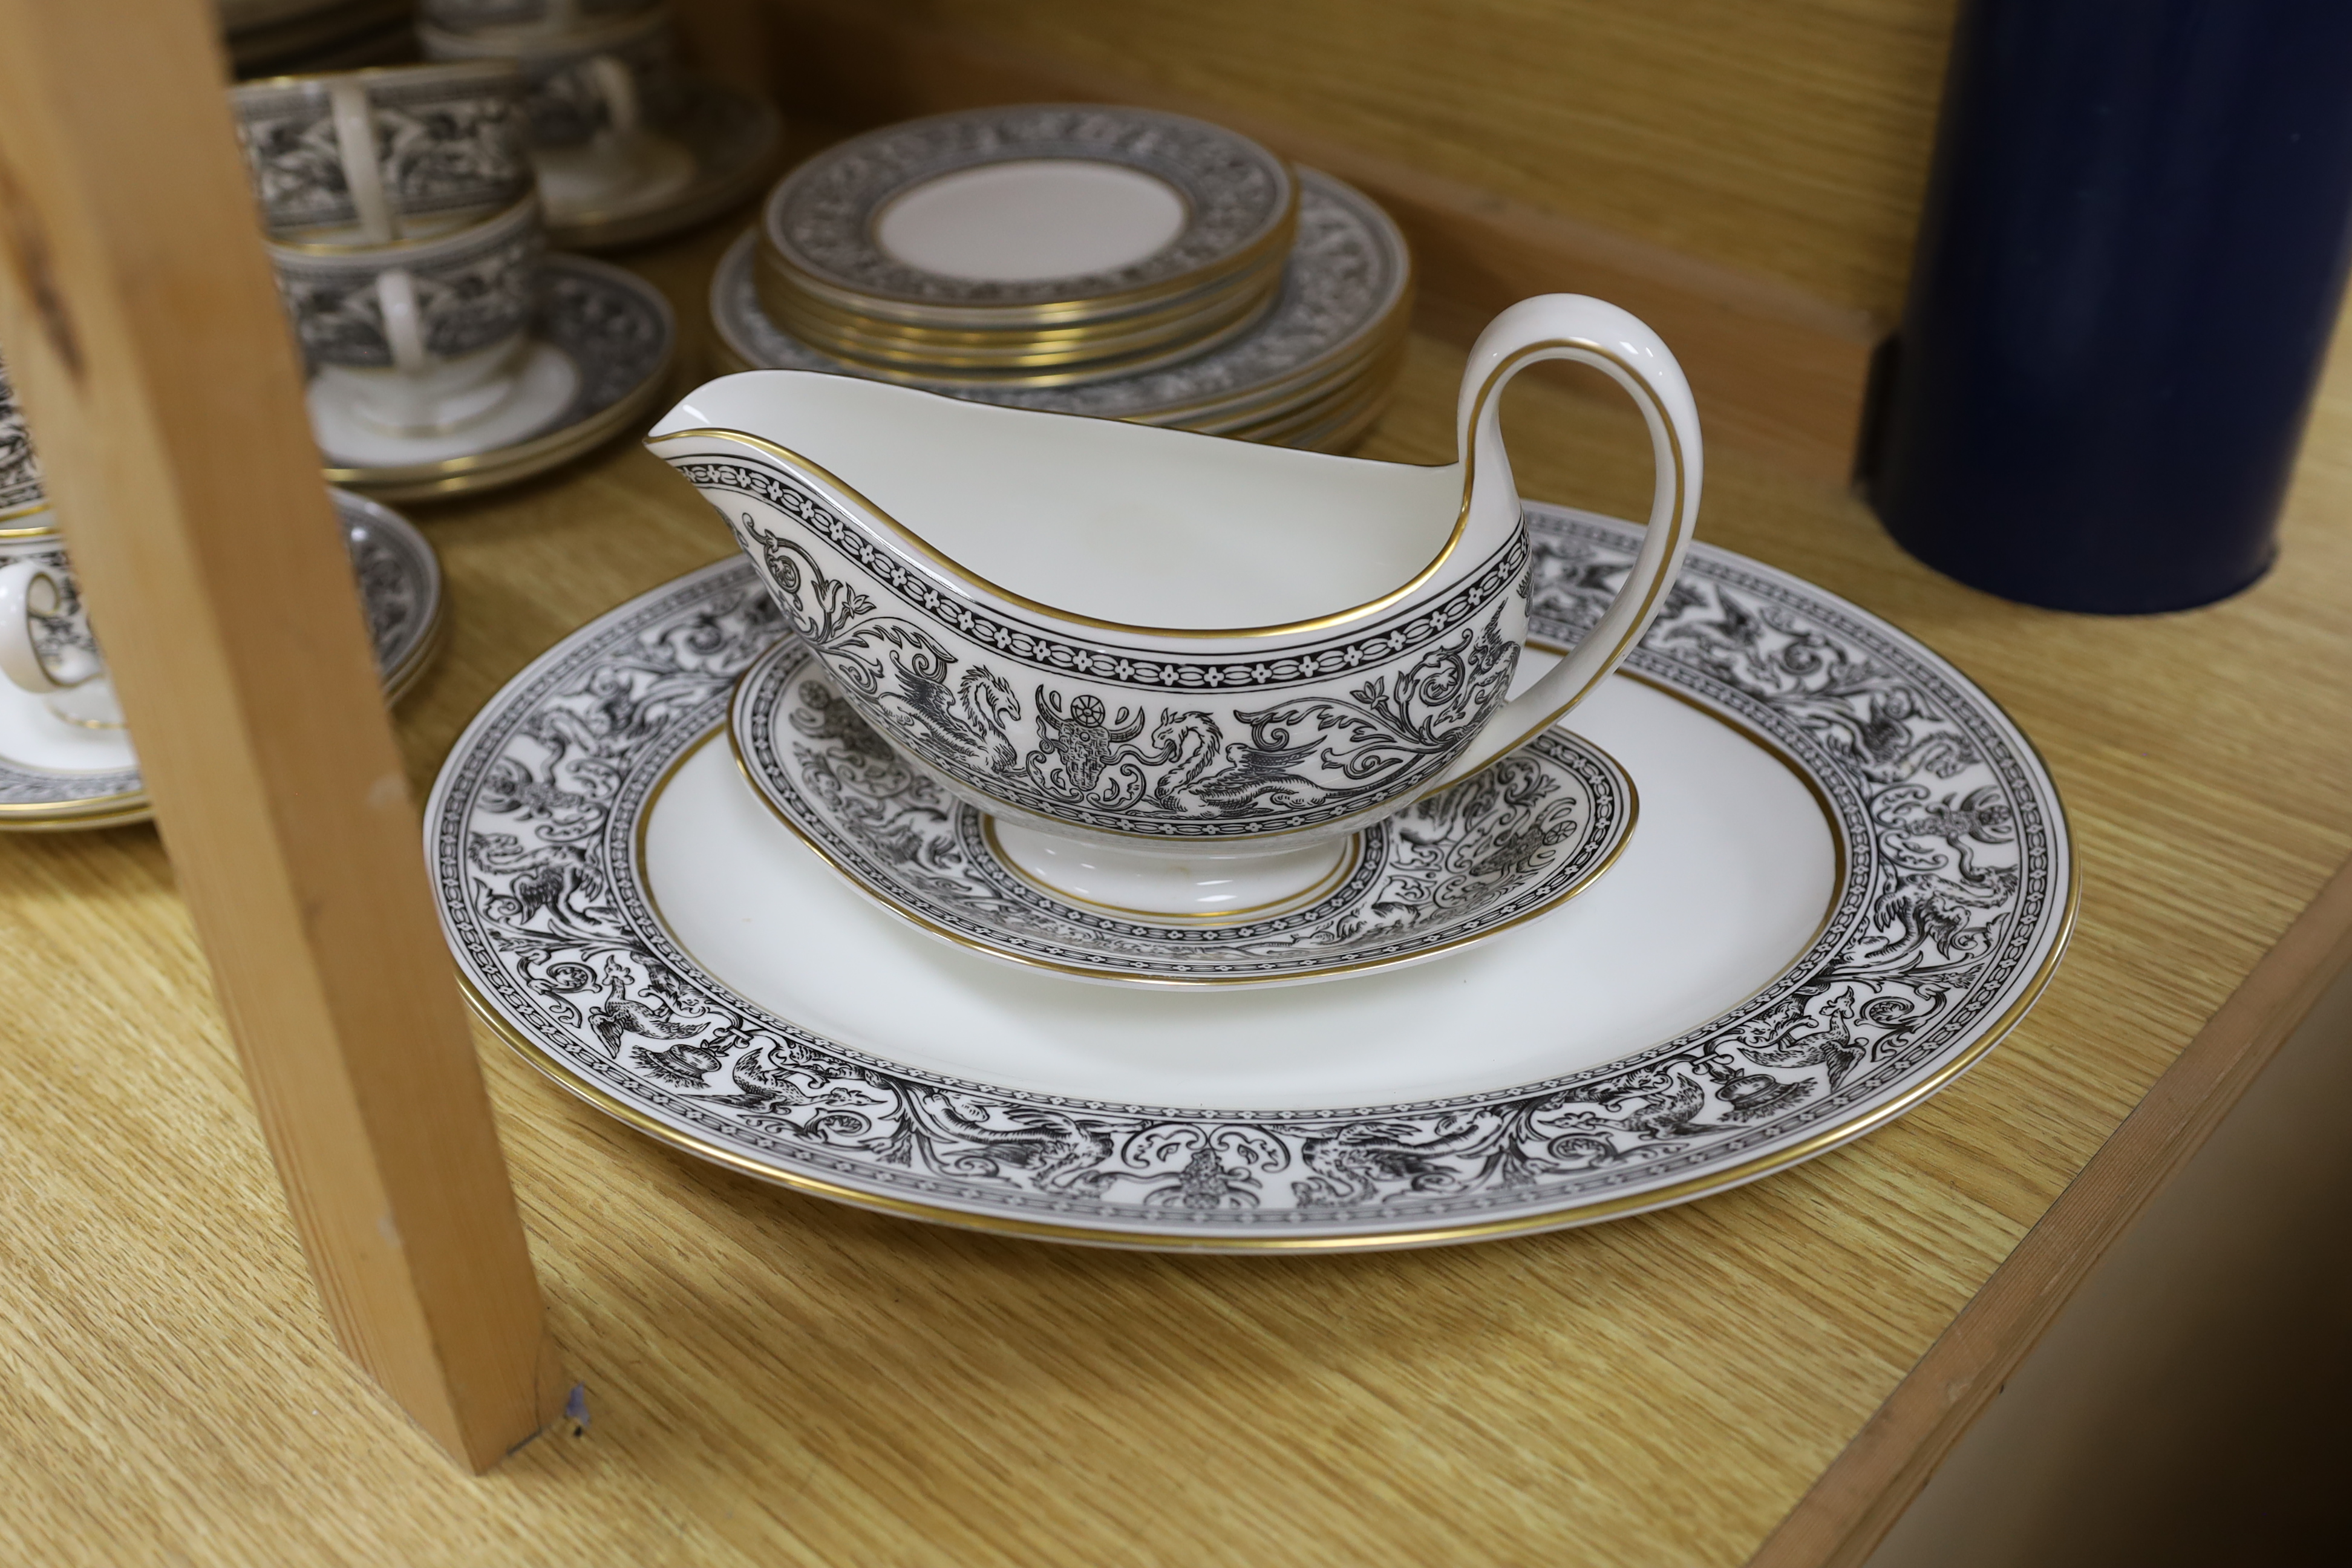 A Wedgwood Florentine part dinner set including twin handled cups, oval platter and dinner plates, largest 34cm wide